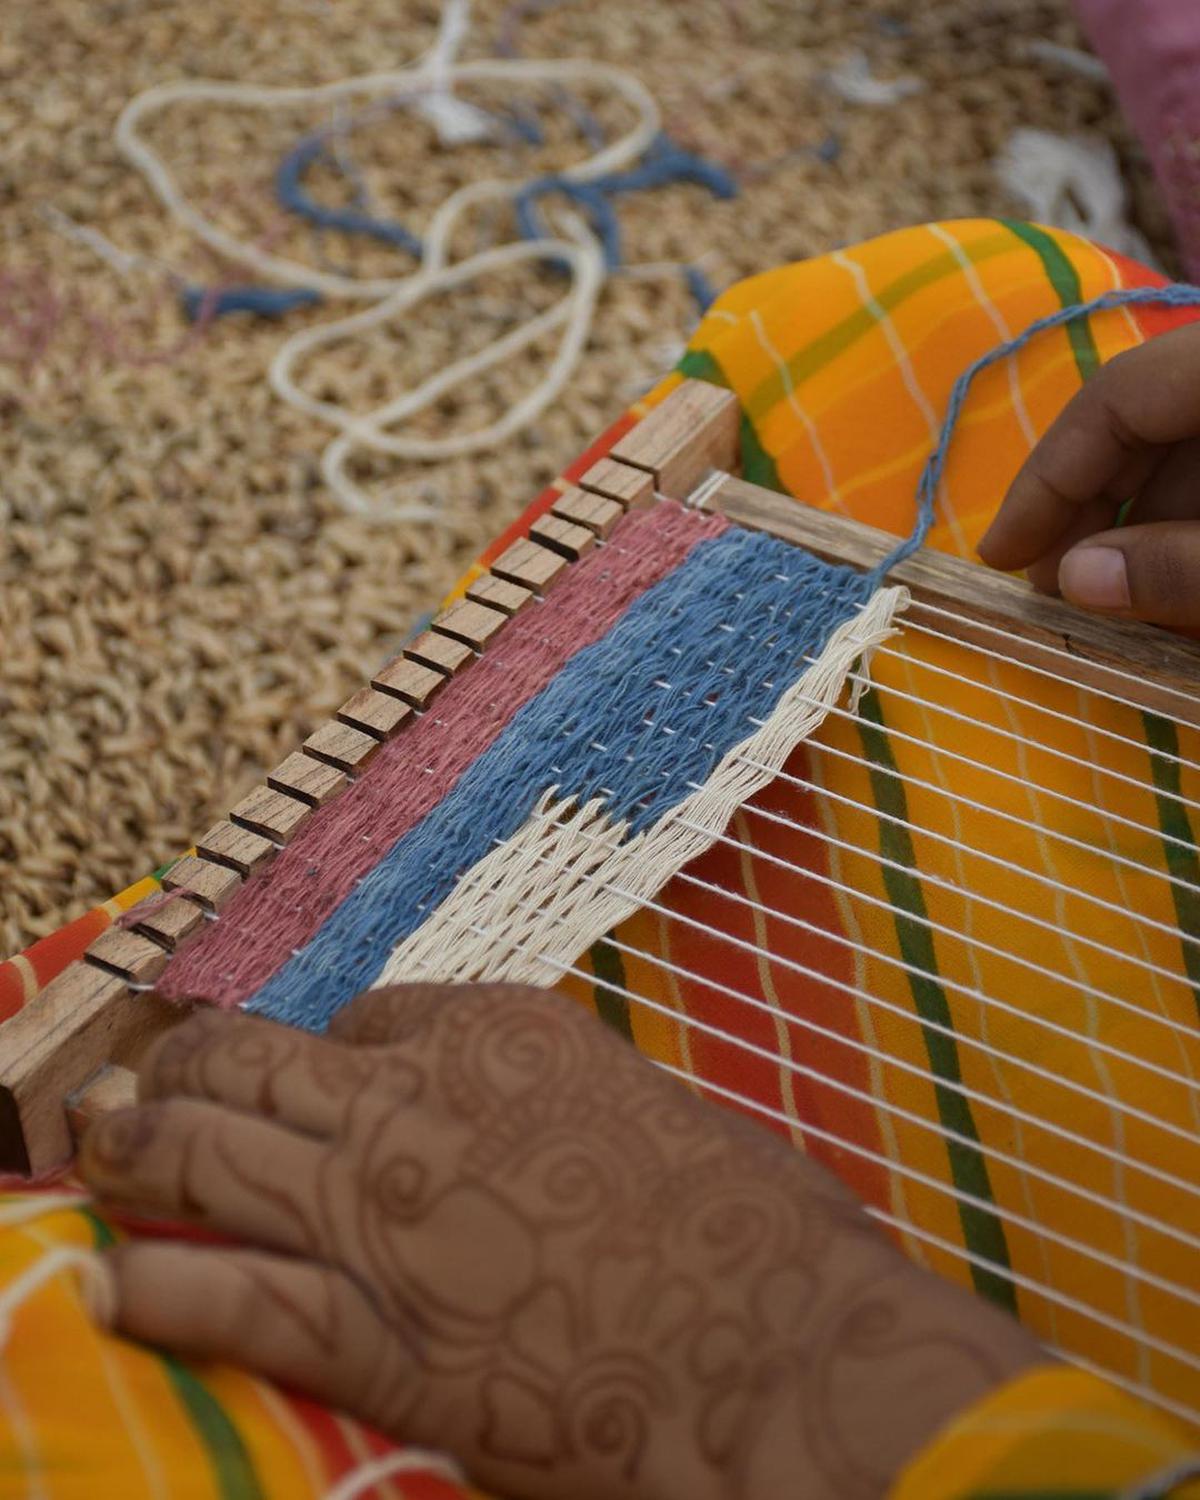 The exhibit that will also feature a demonstration of weaving by Nila Jaipur